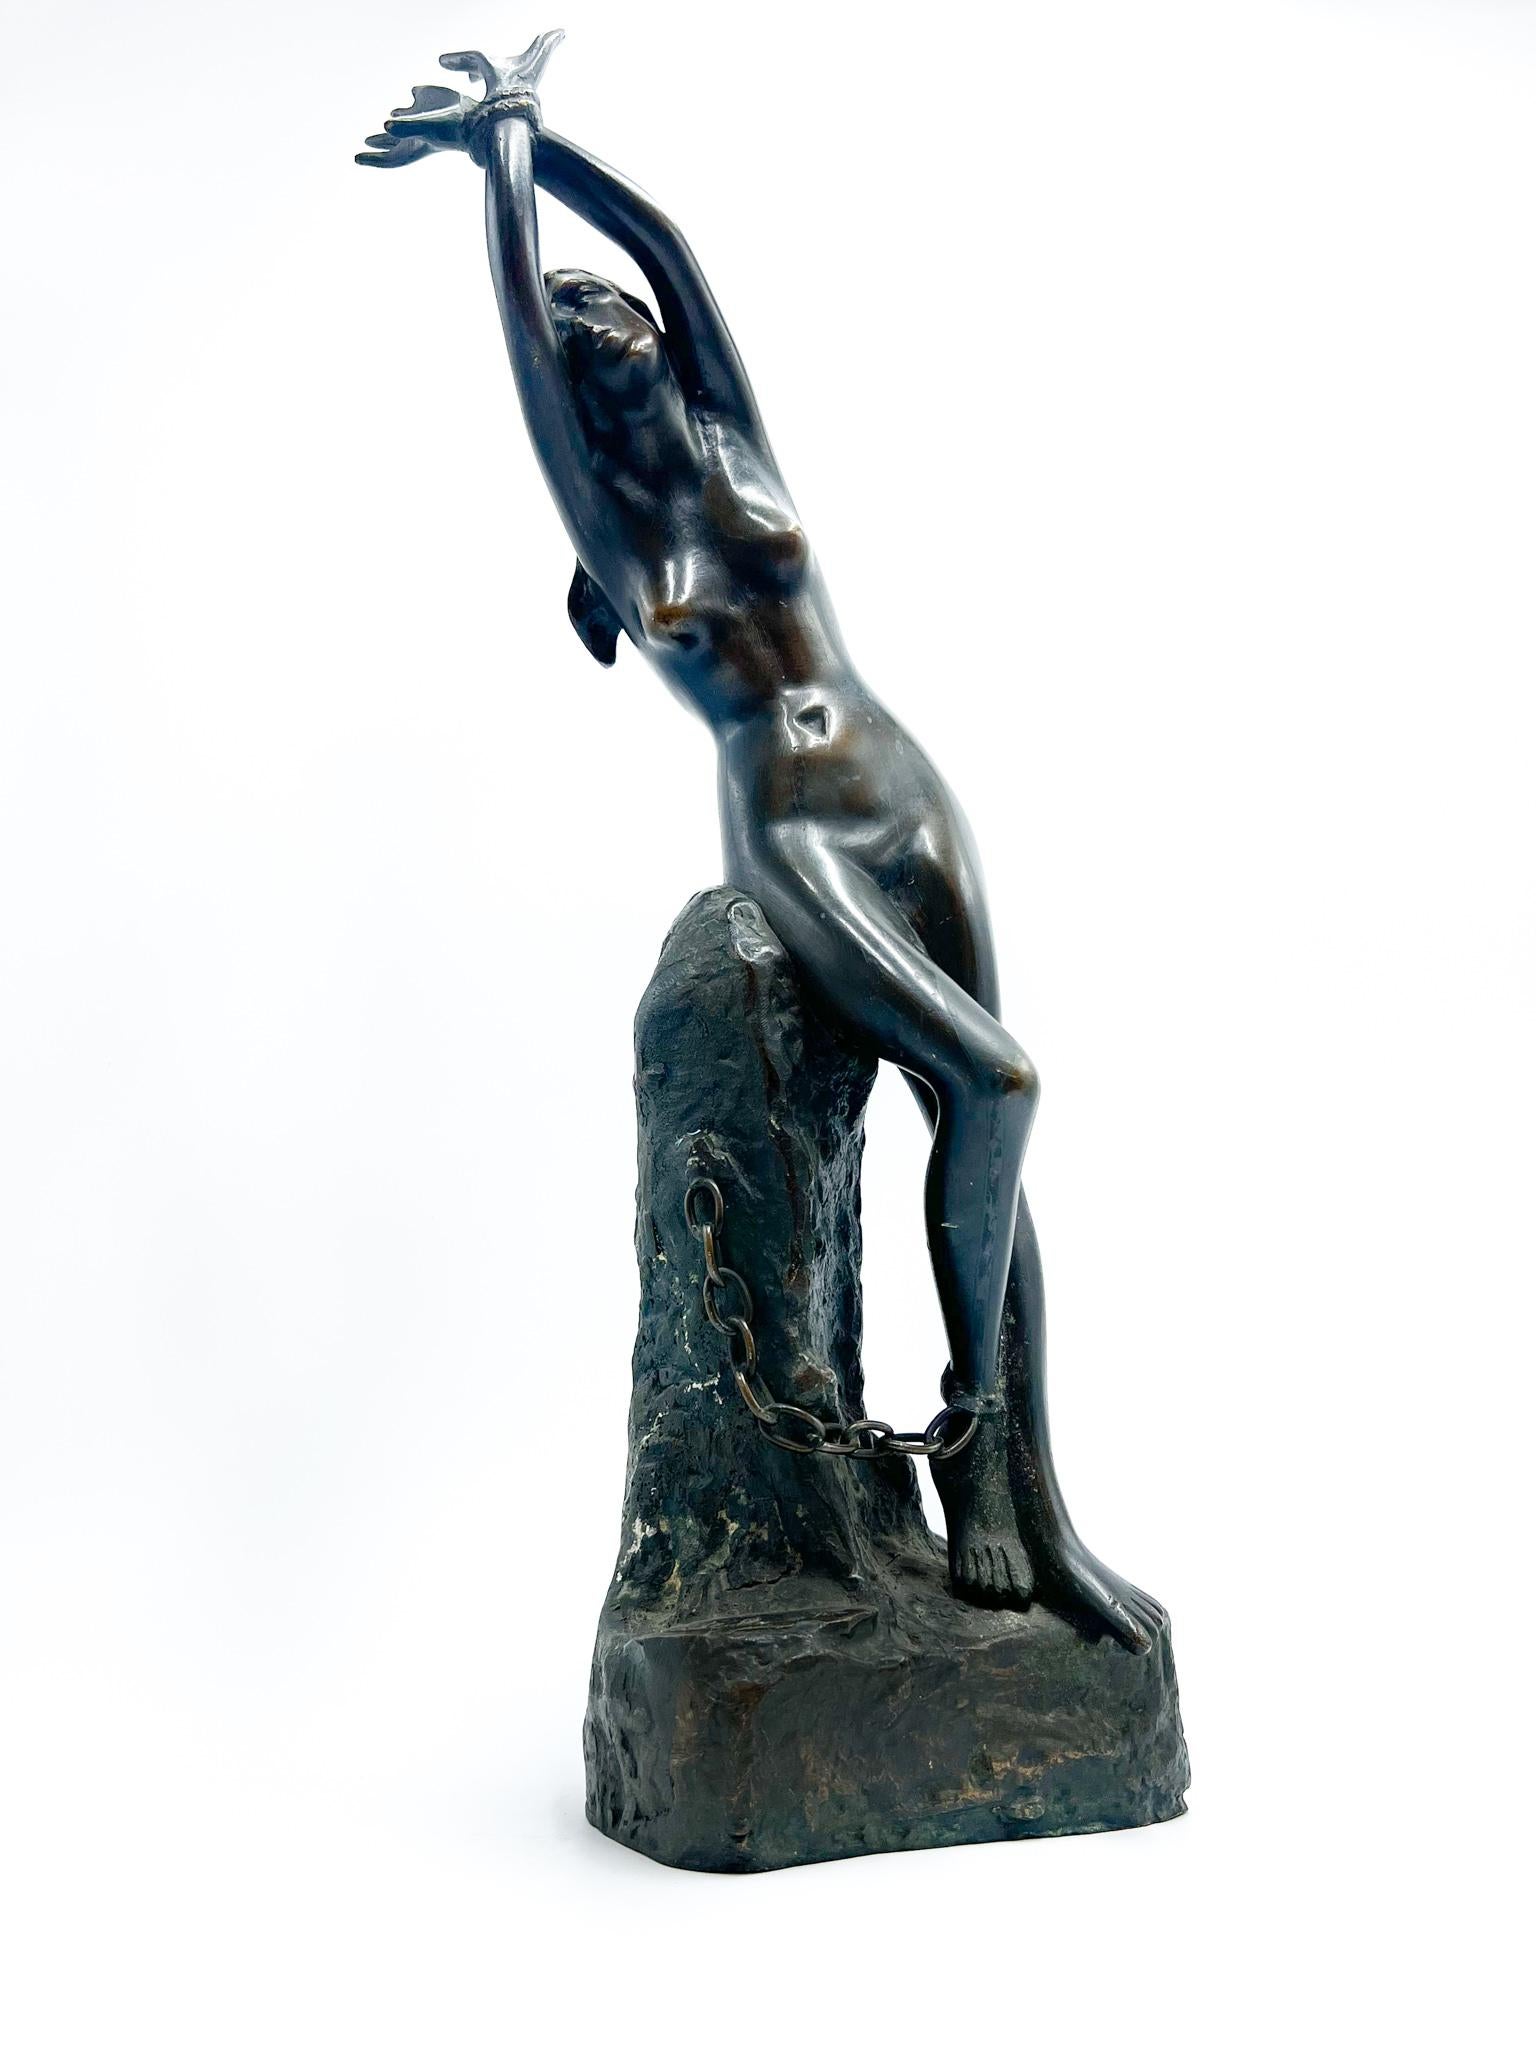 Italian Bronze Sculpture of Chained Woman by Odoardo Tabacchi from the 1800s For Sale